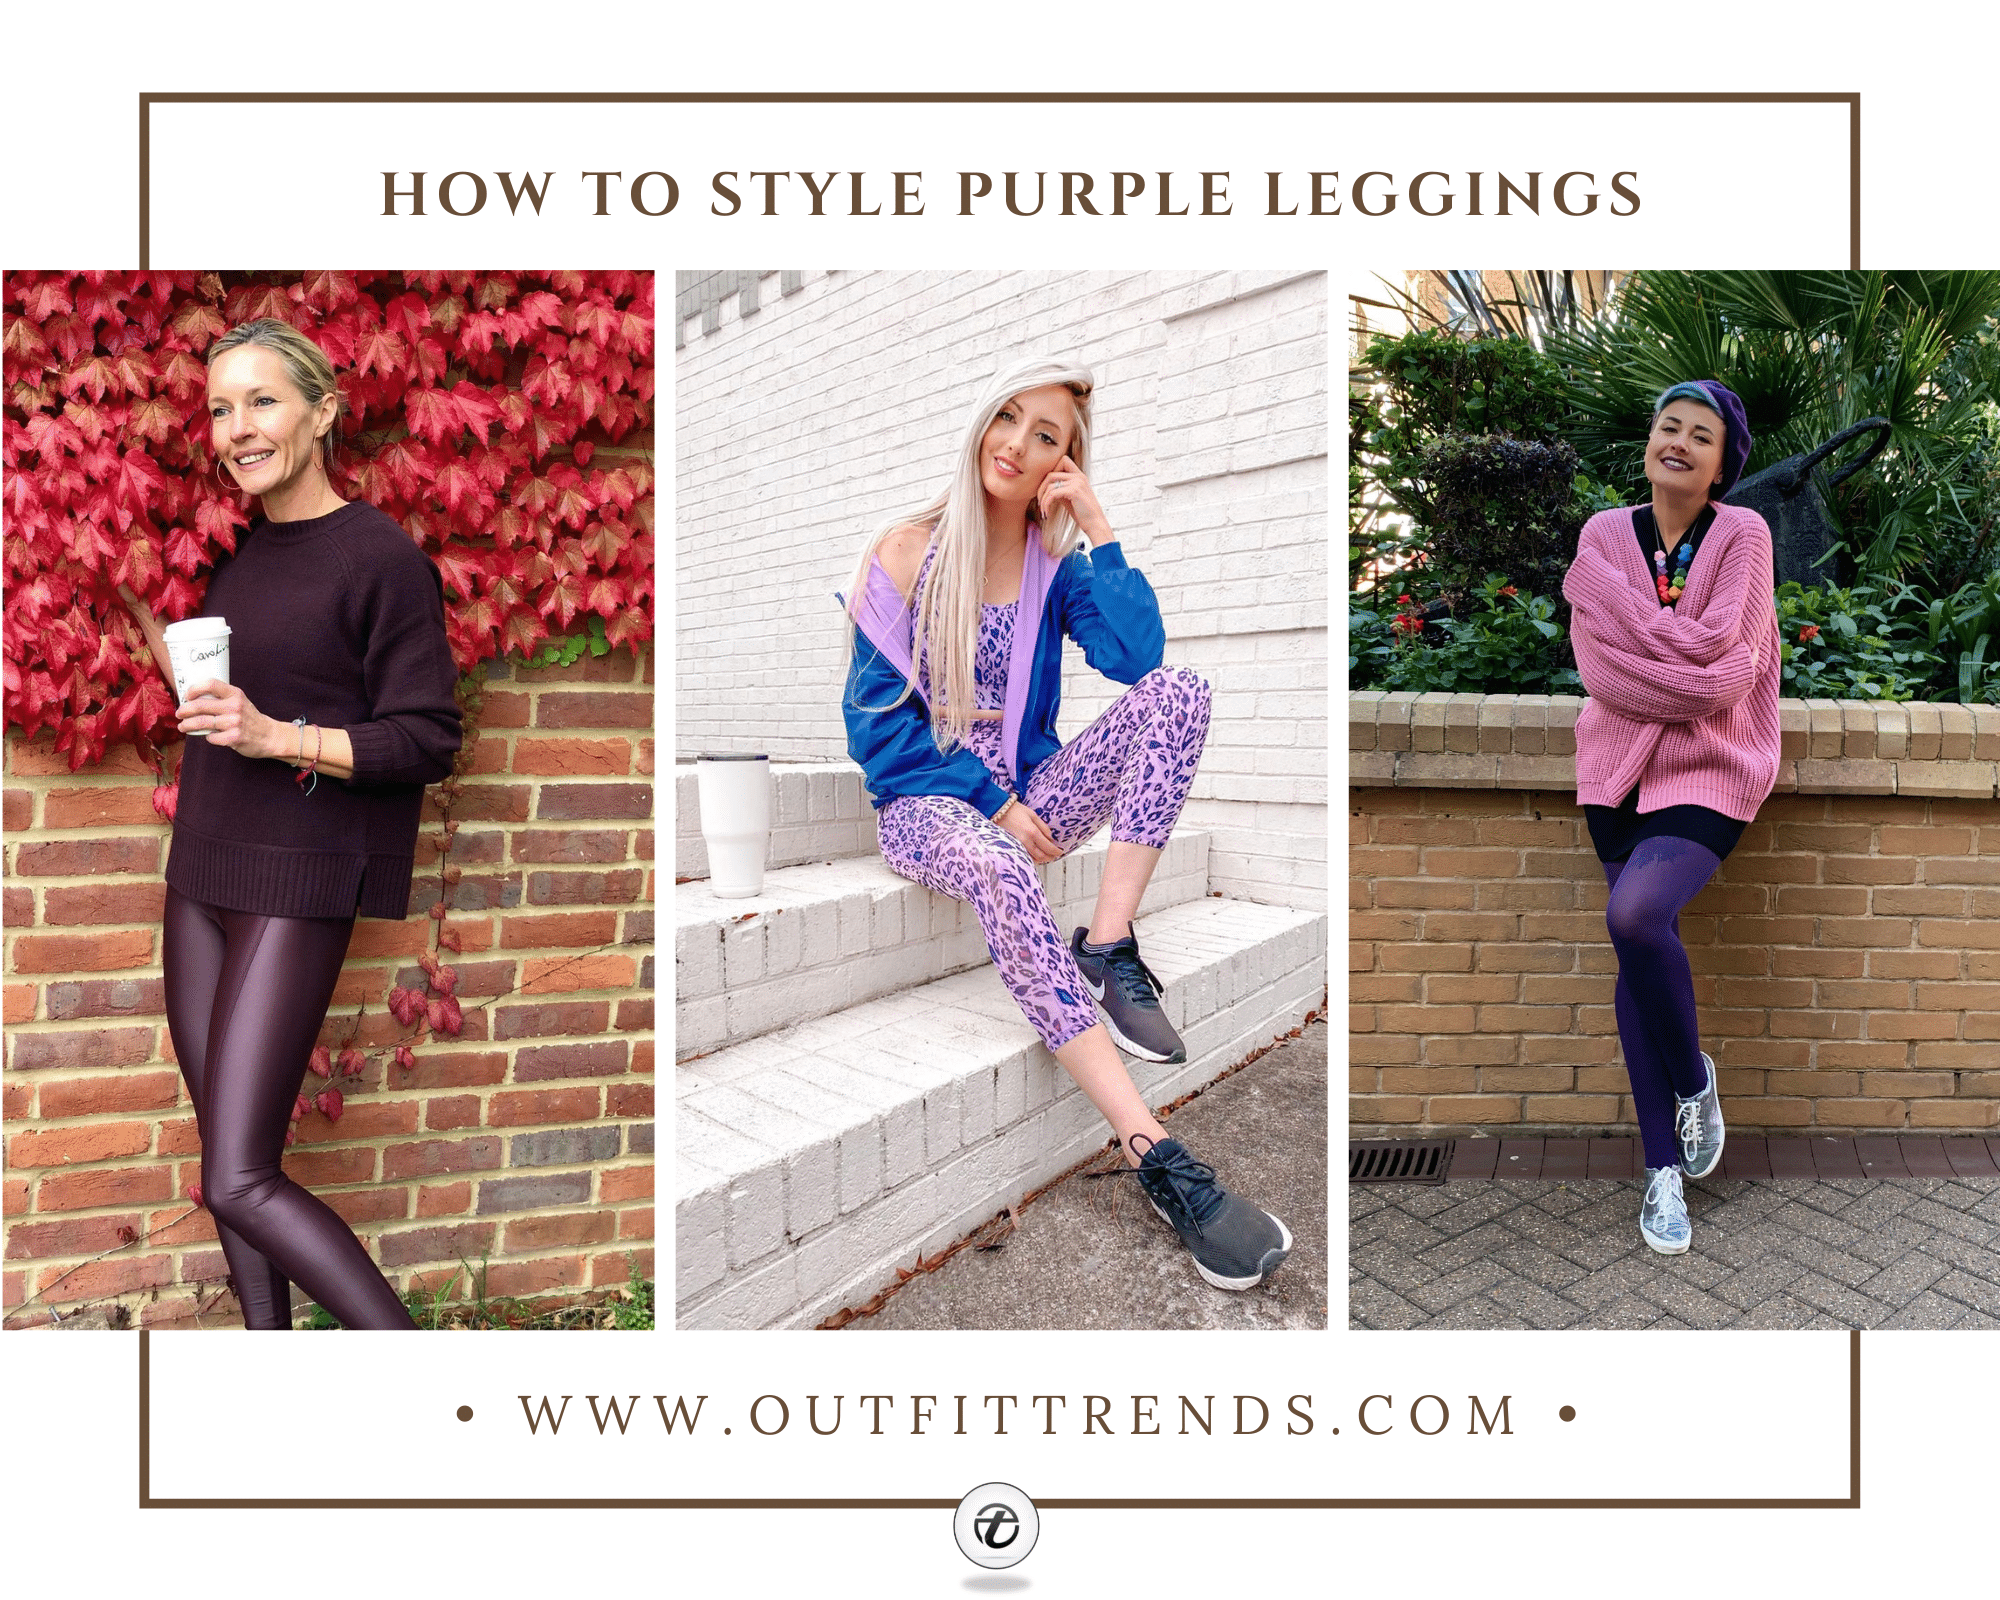 How To Style Purple Leggings-21 Outfits With Purple Leggings